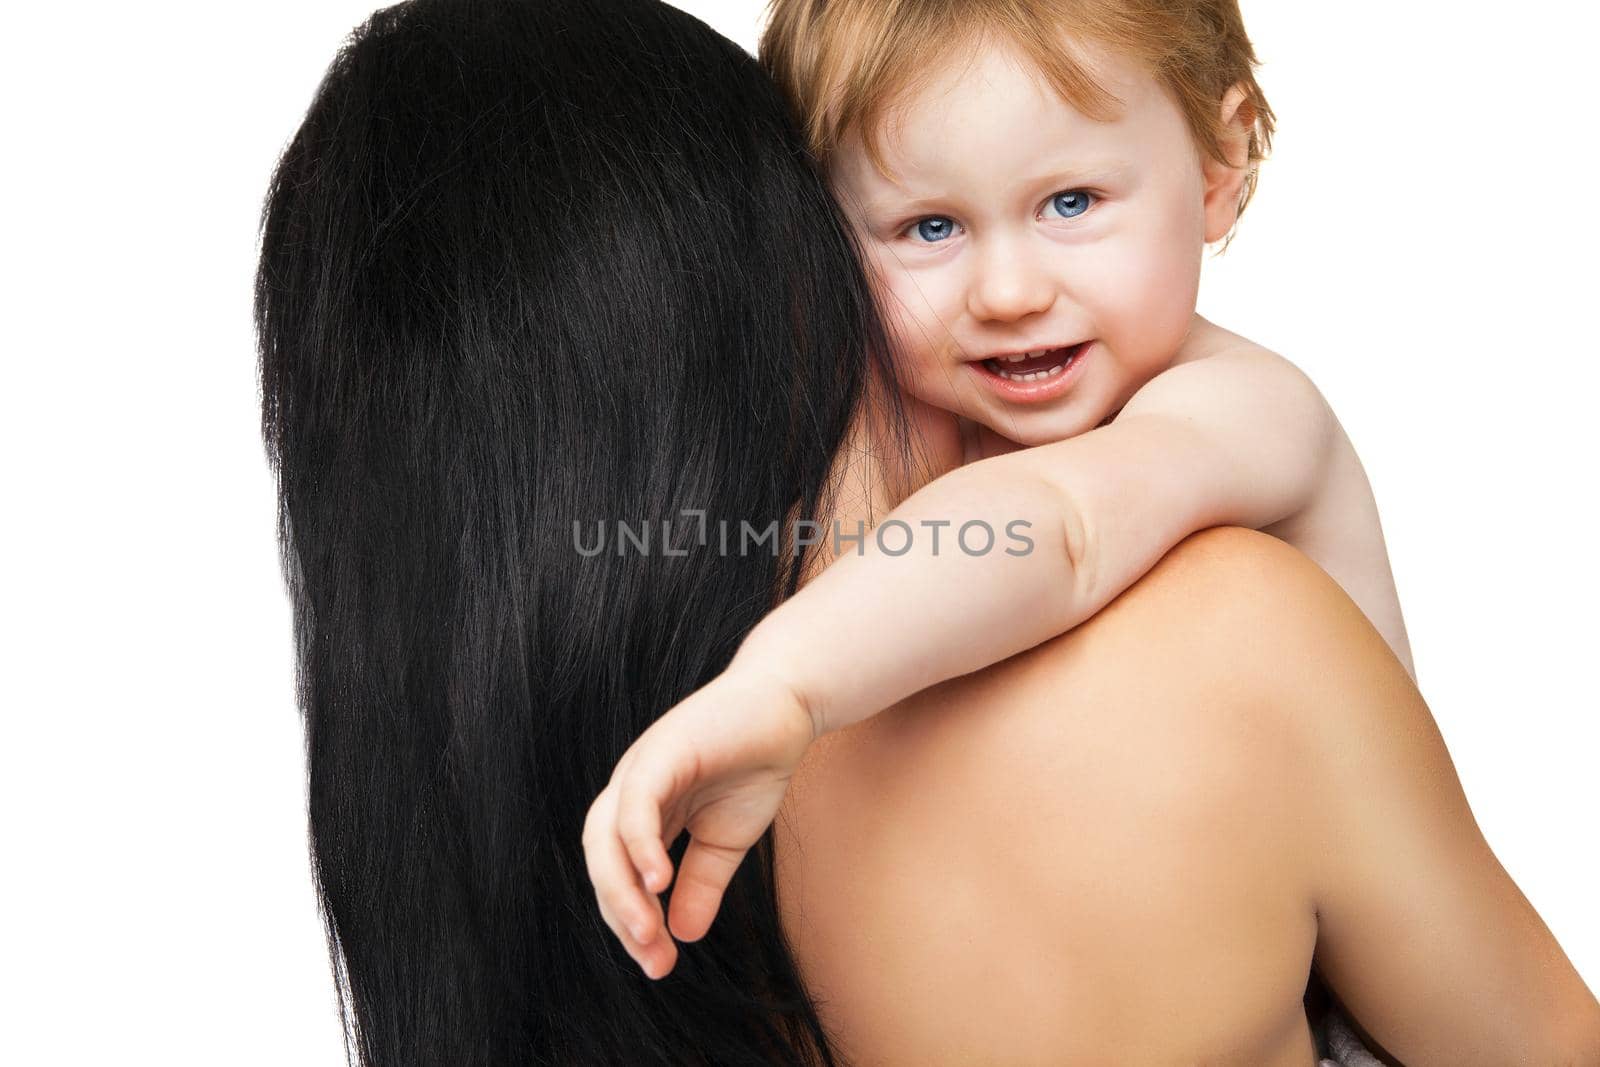 Young mother with her baby after bathing in a white towel